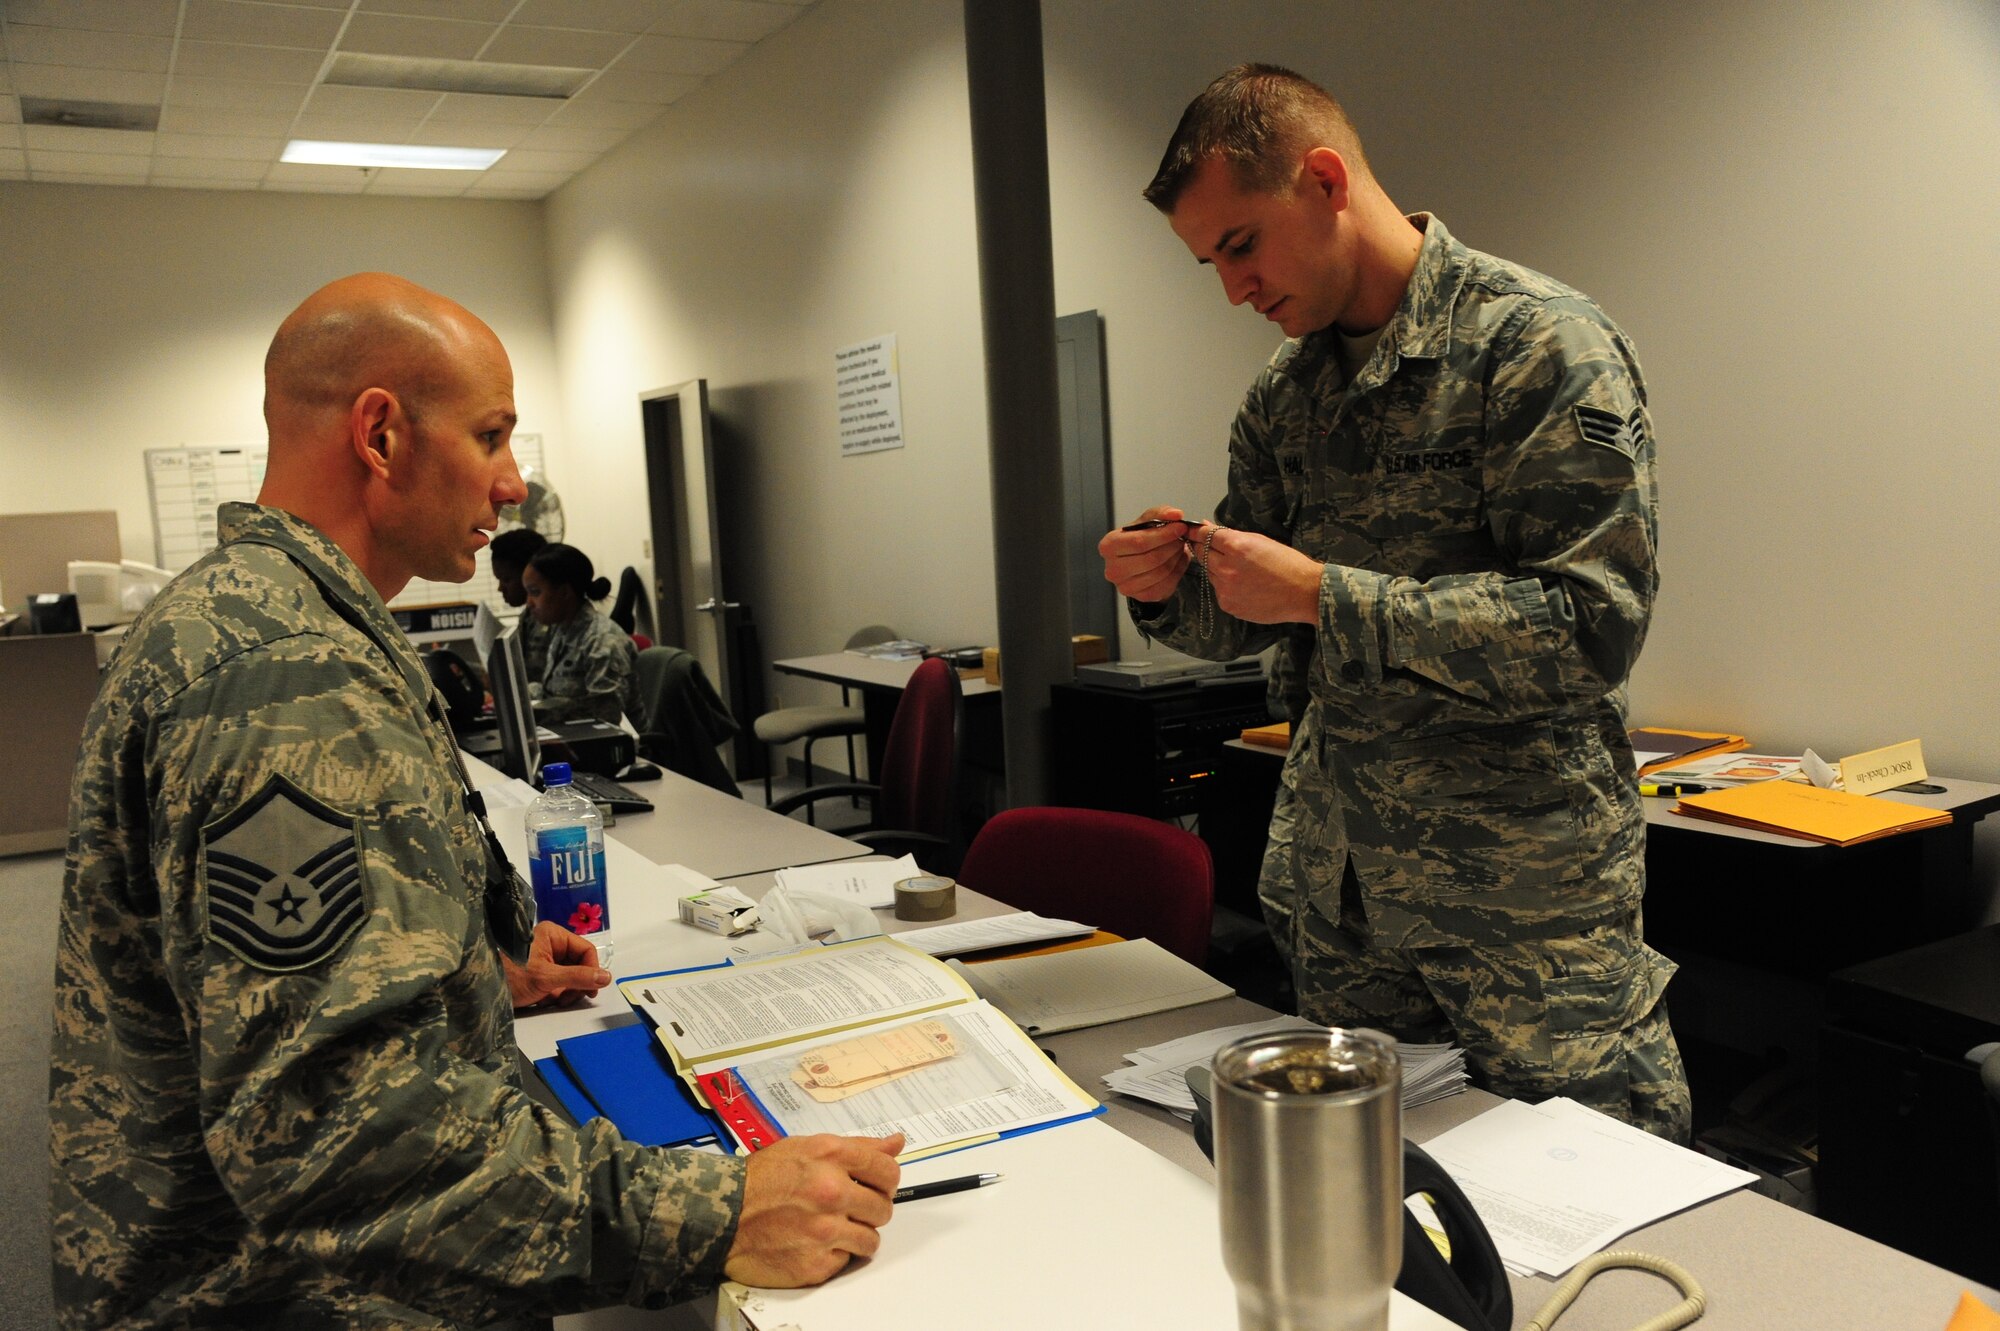 U.S. Air Force Senior Airman Aaron Hall, a 509th Force Support Squadron career development coordinator, processes deployment documents for Master Sgt. Cory McGee, the 509th Civil Engineer Squadron assistant chief of B shift, during CONSTANT VIGILANCE 16 at Whiteman Air Force Base, Mo., April 12, 2016. The exercise includes elements that test and refine Air Force Global Strike Command’s policies, training and techniques at the tactical and operational levels. (U.S. Air Force photo by Airman 1st Class Keenan Berry)